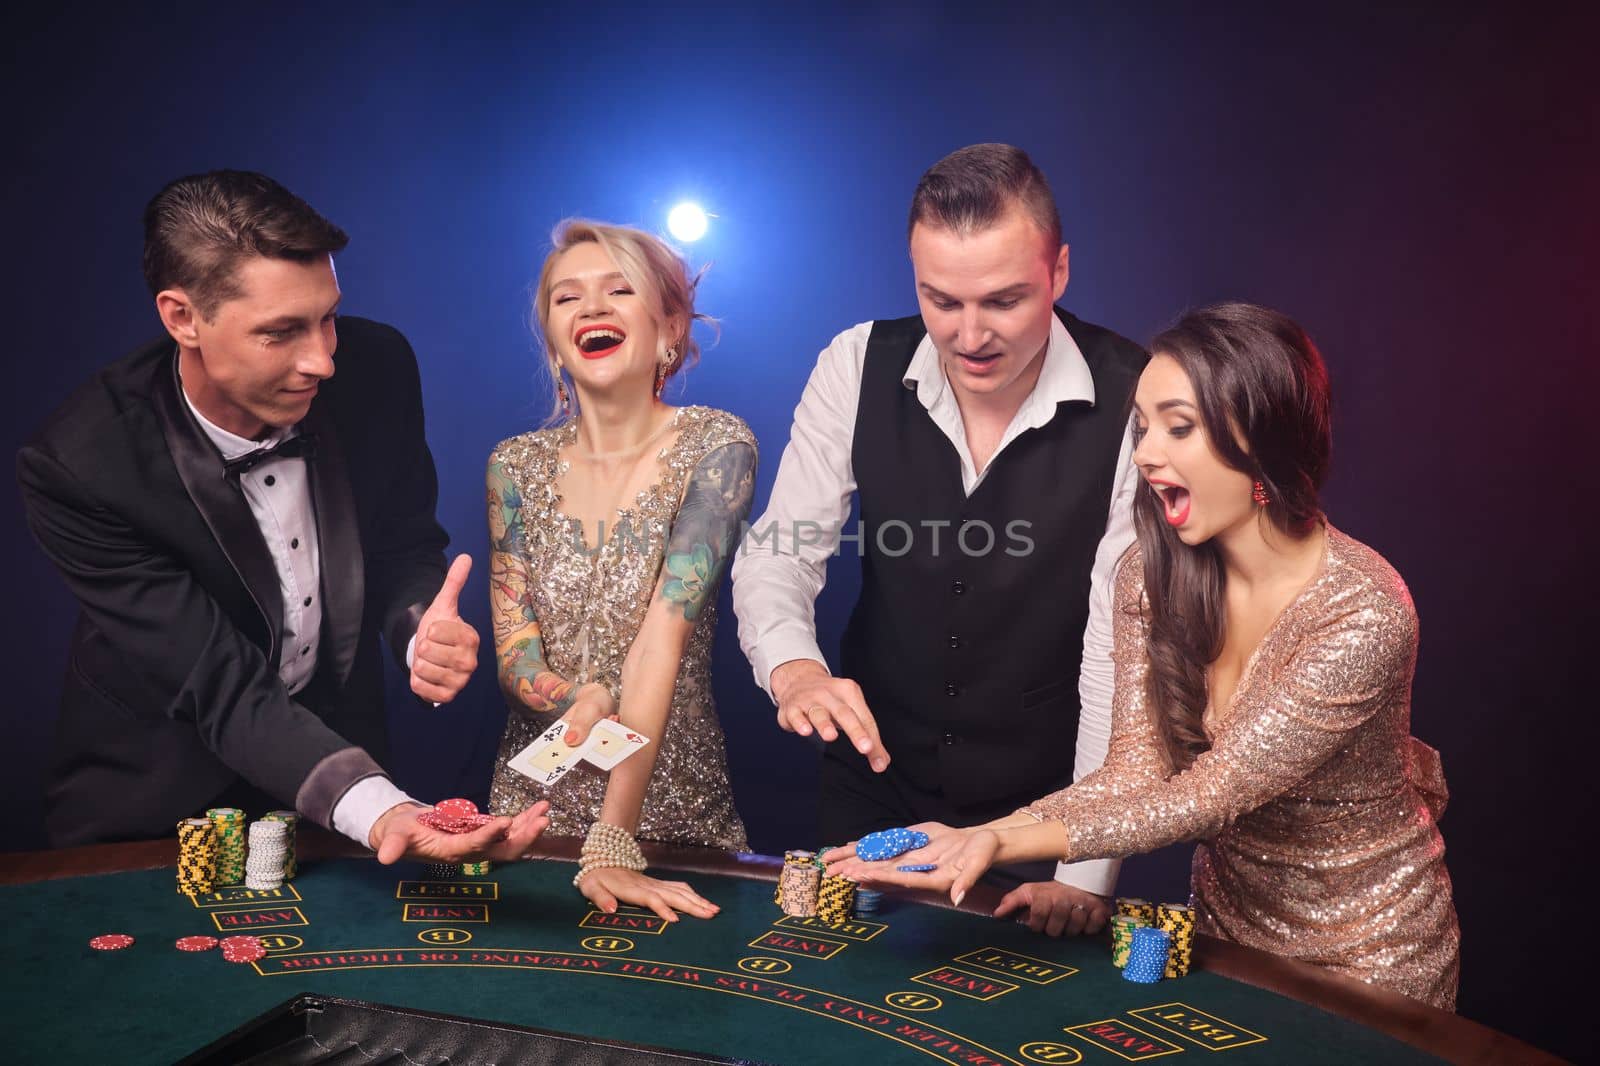 Group of a cheerful rich classmates are playing poker at casino. Youth are making bets waiting for a big win. They are having fun standing at the table against a red and blue backlights on black background. Risky gambling entertainment.